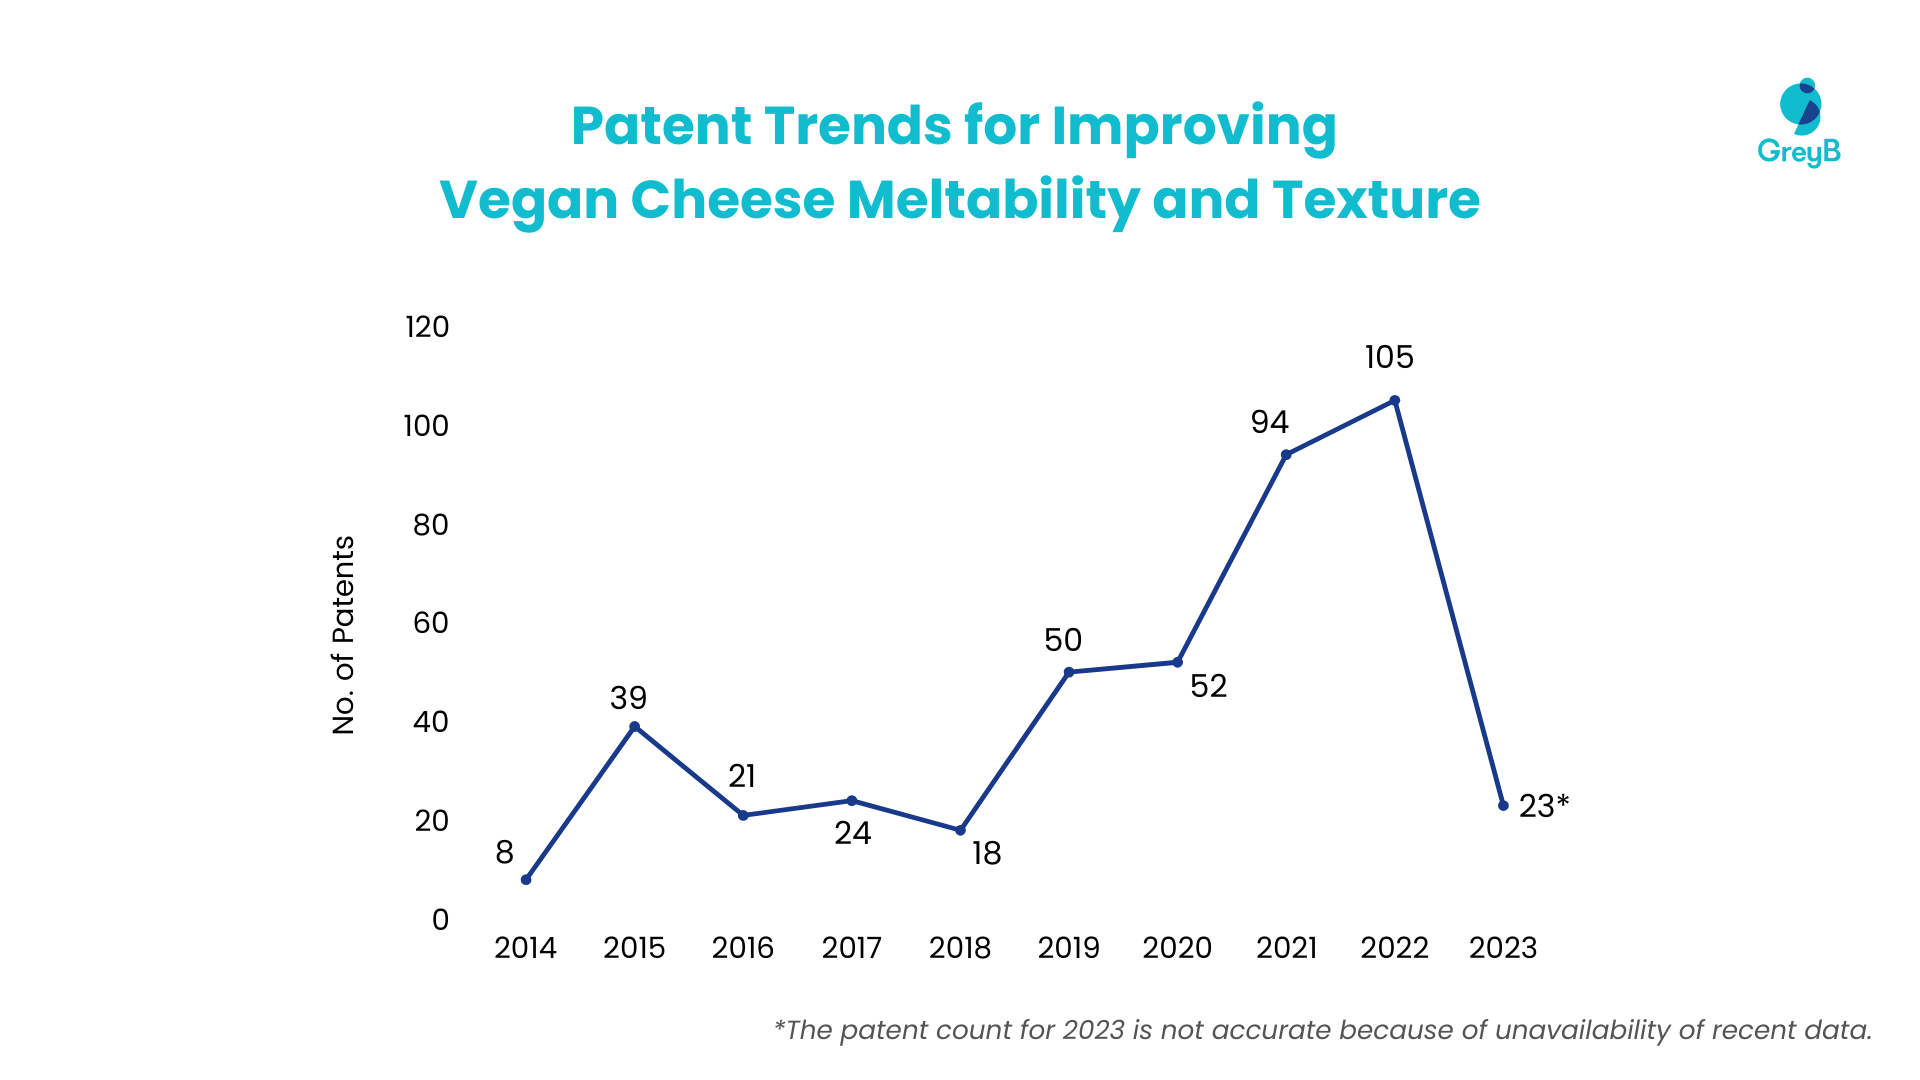 Dairy Industry Innovation Trends: Patent  filing trends to improve vegan cheese meltability and texture